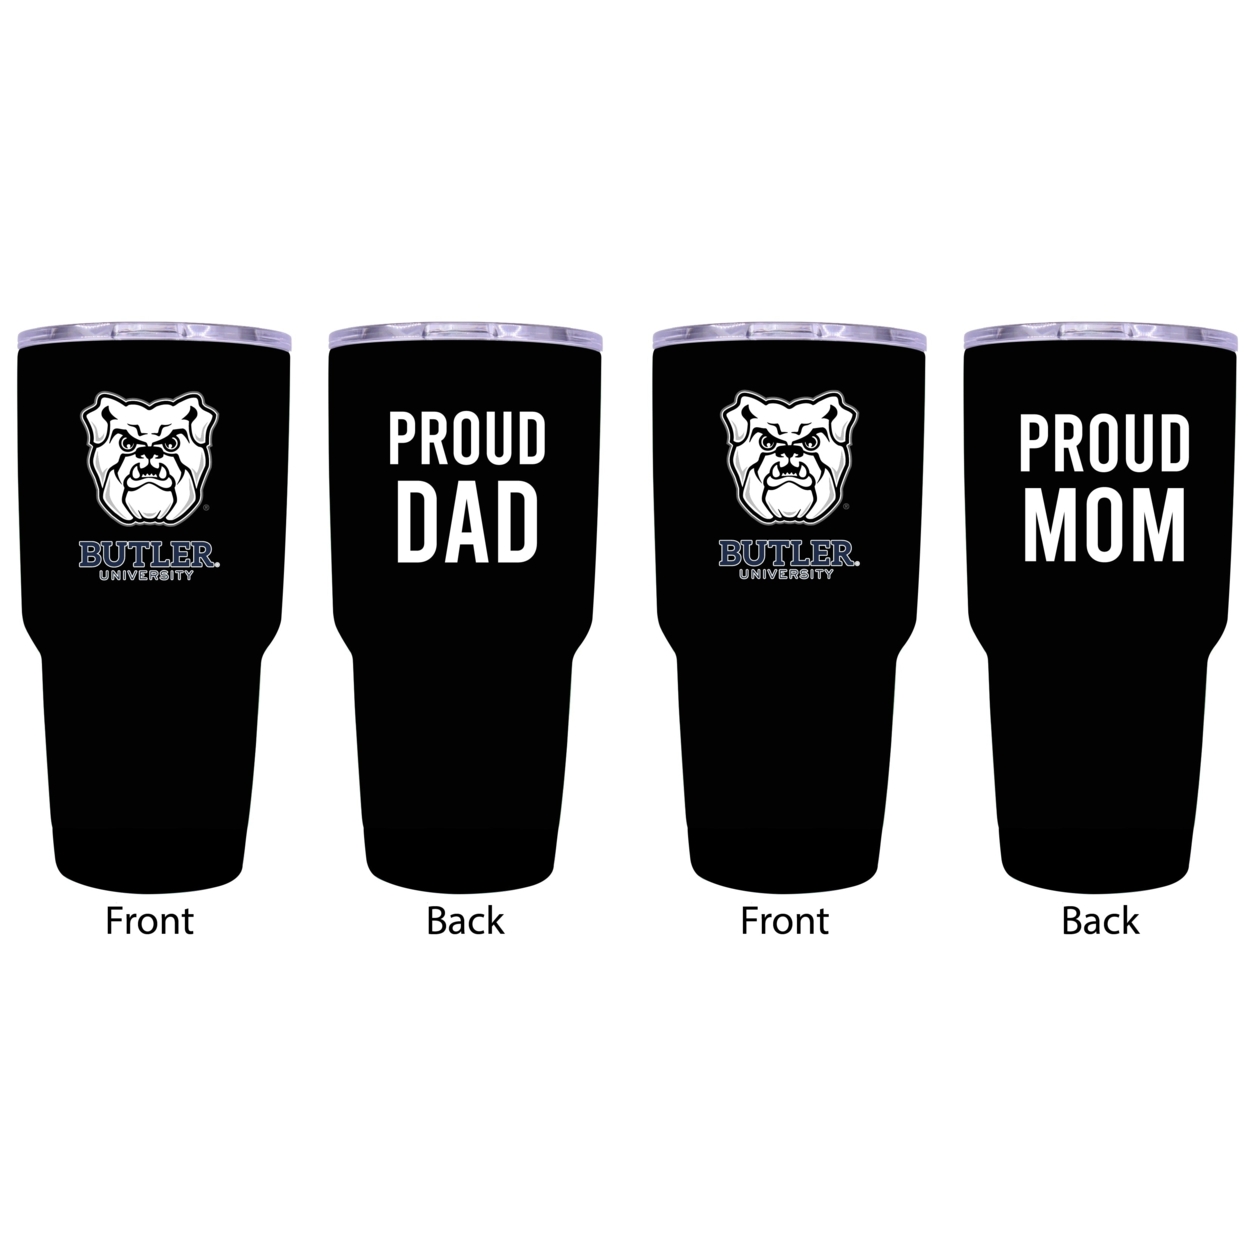 Butler Bulldogs Proud Mom And Dad 24 Oz Insulated Stainless Steel Tumblers 2 Pack Black.